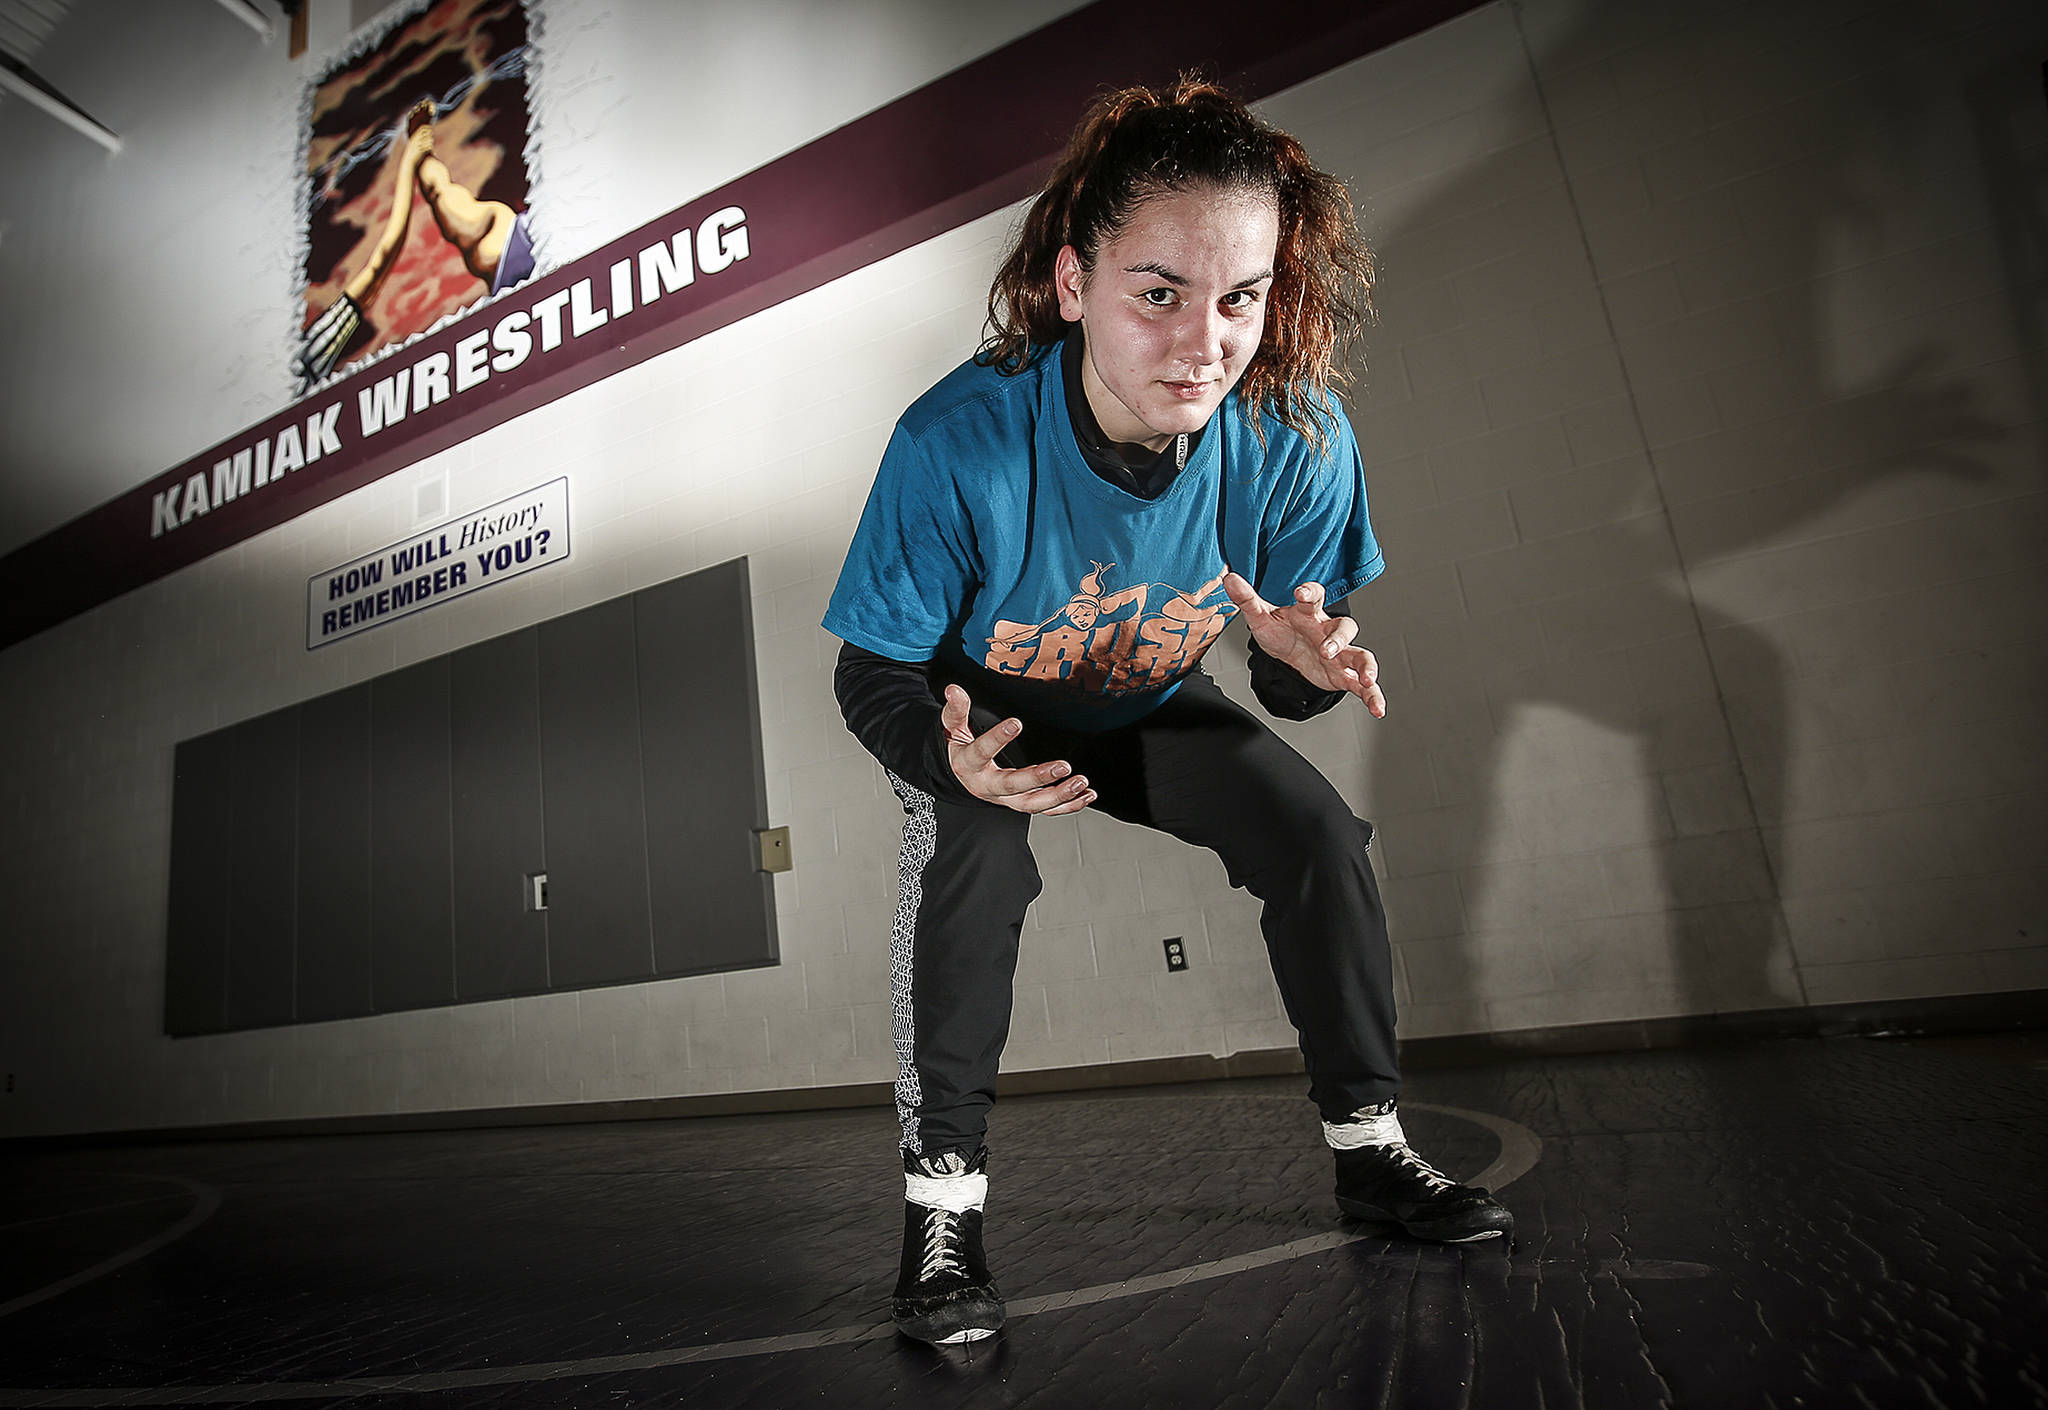 Ian Terry / The Herald Kamiak senior wrestler Ally de la Cruz, a multisport athlete, will compete at the state wrestling tournament on Saturday. Photo taken on 02132018                                Kamiak’s Ally de la Cruz took sixth place in the 140-pound division at Mat Classic in February.